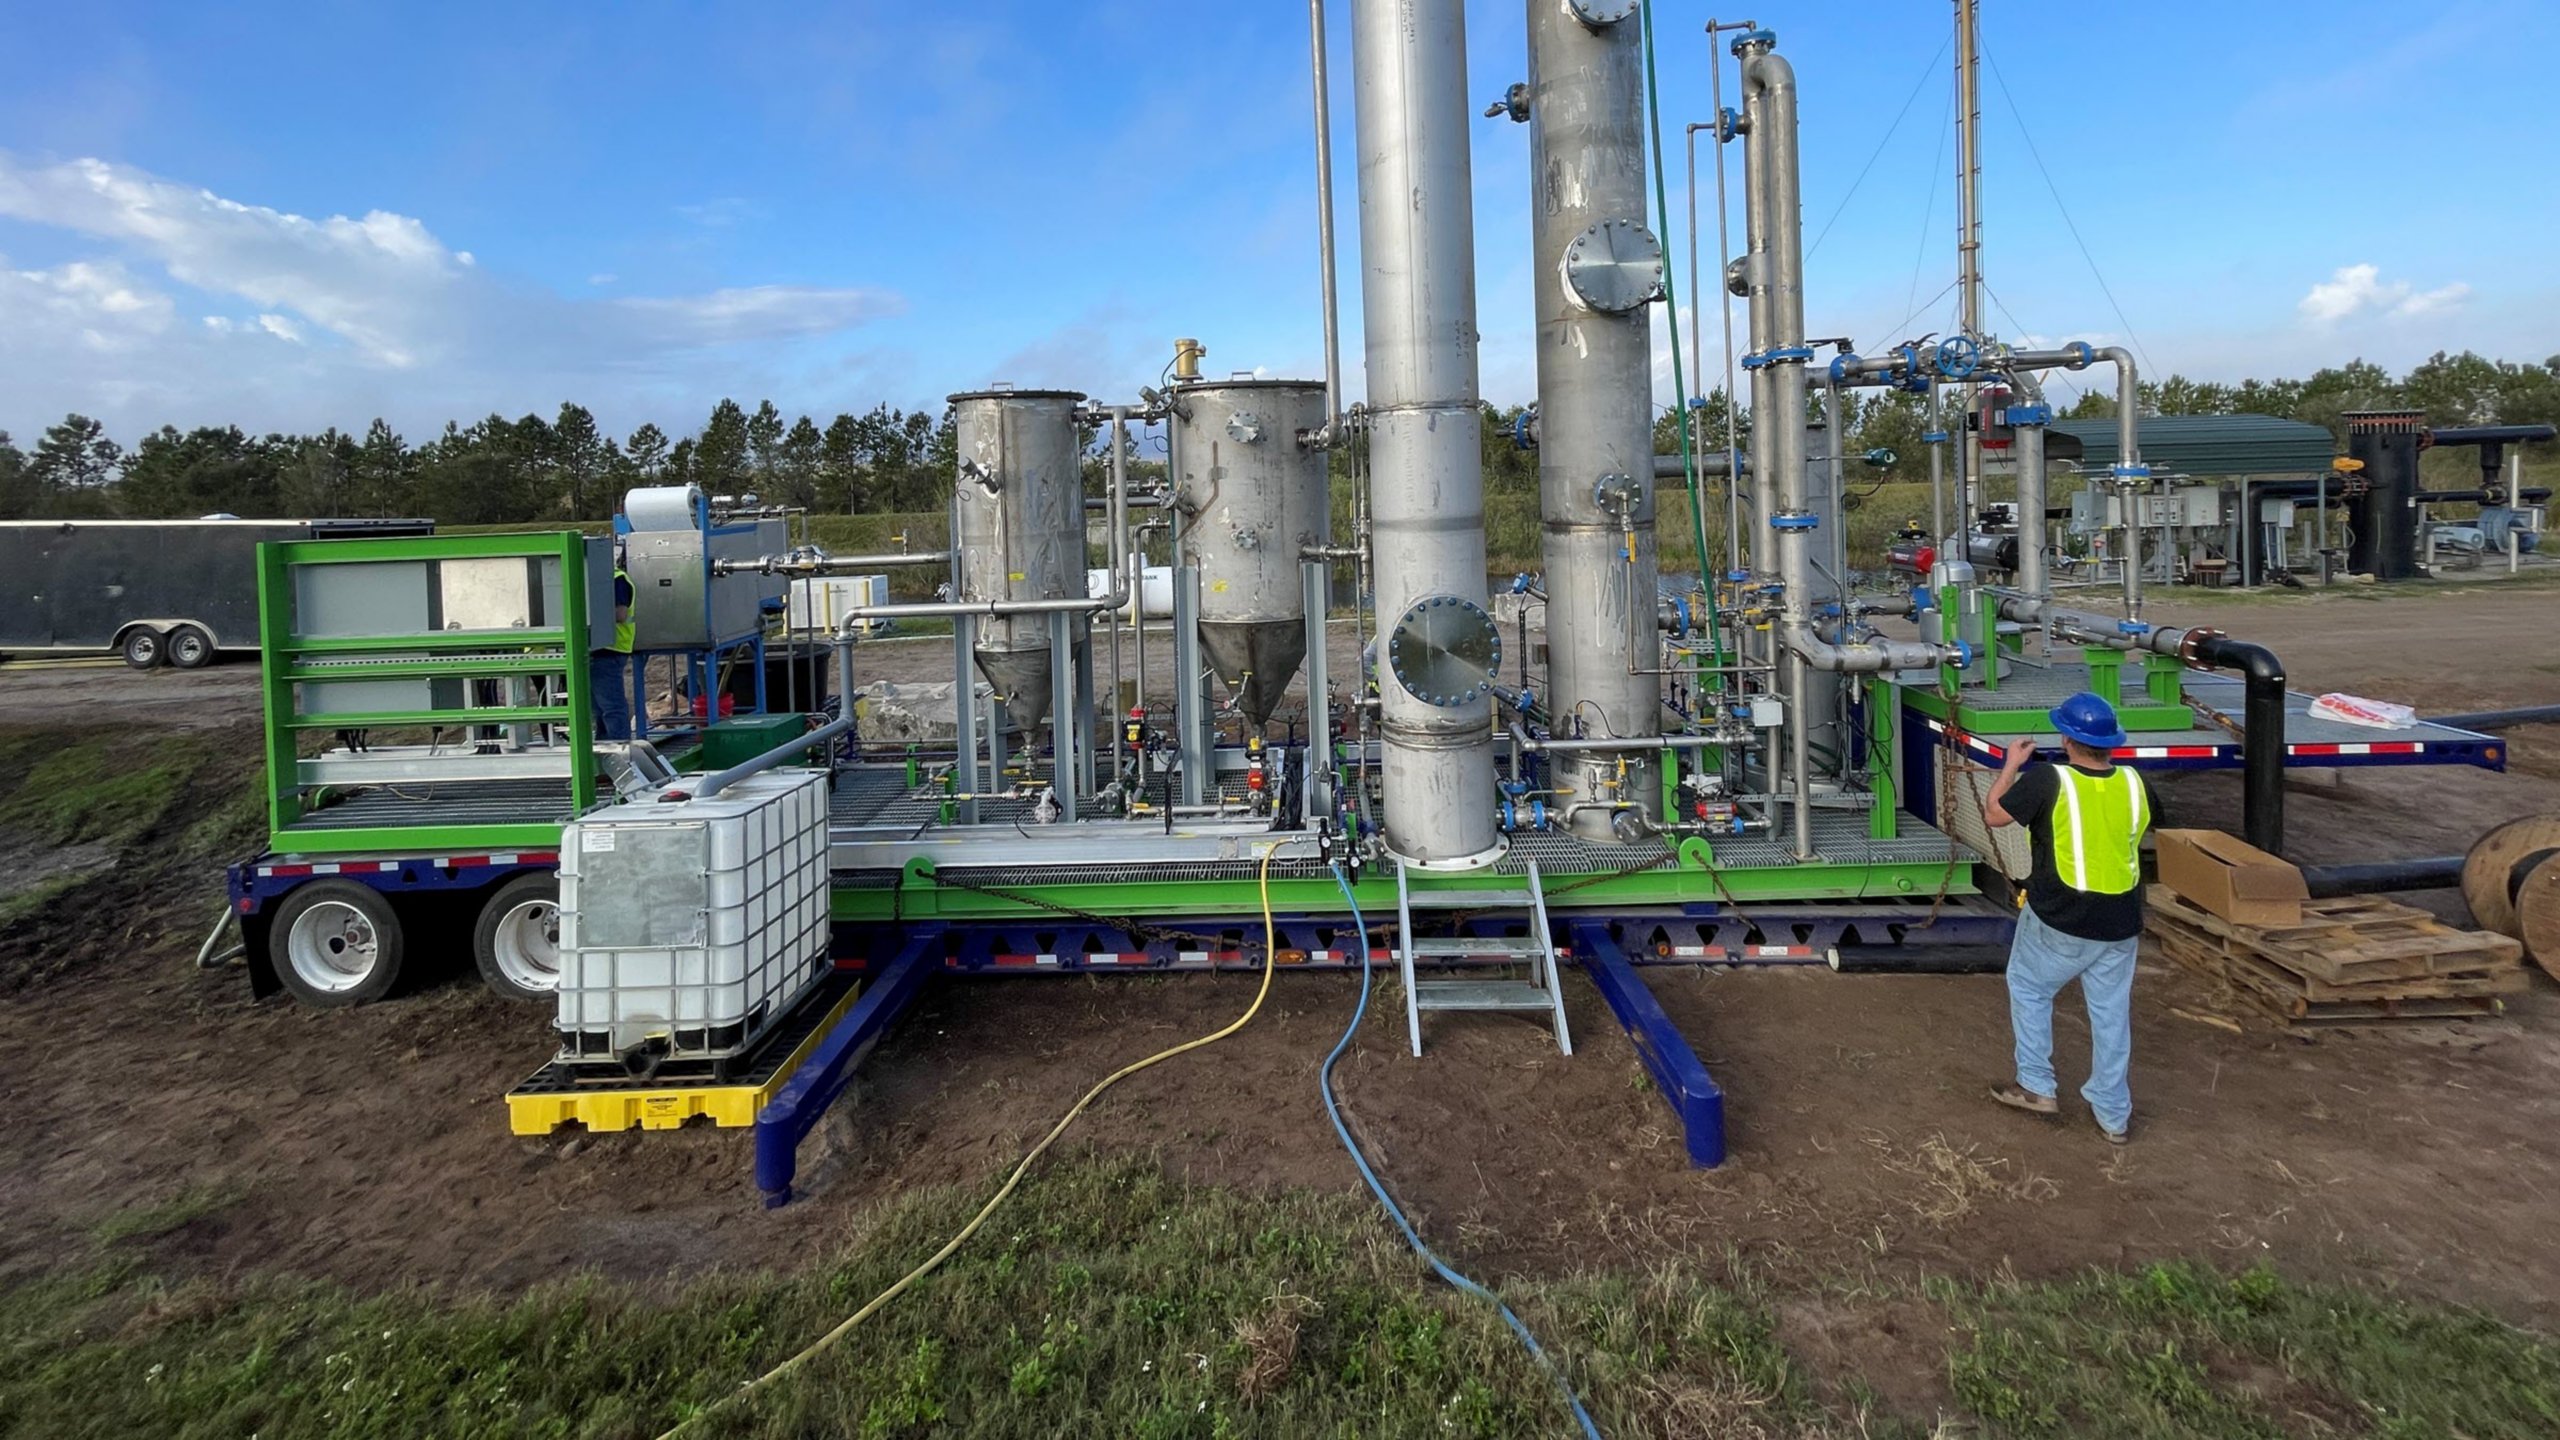 A process skid located outdoors in a remote area for the removal of hydrogen sulfide (H2S) in biogas waste streams